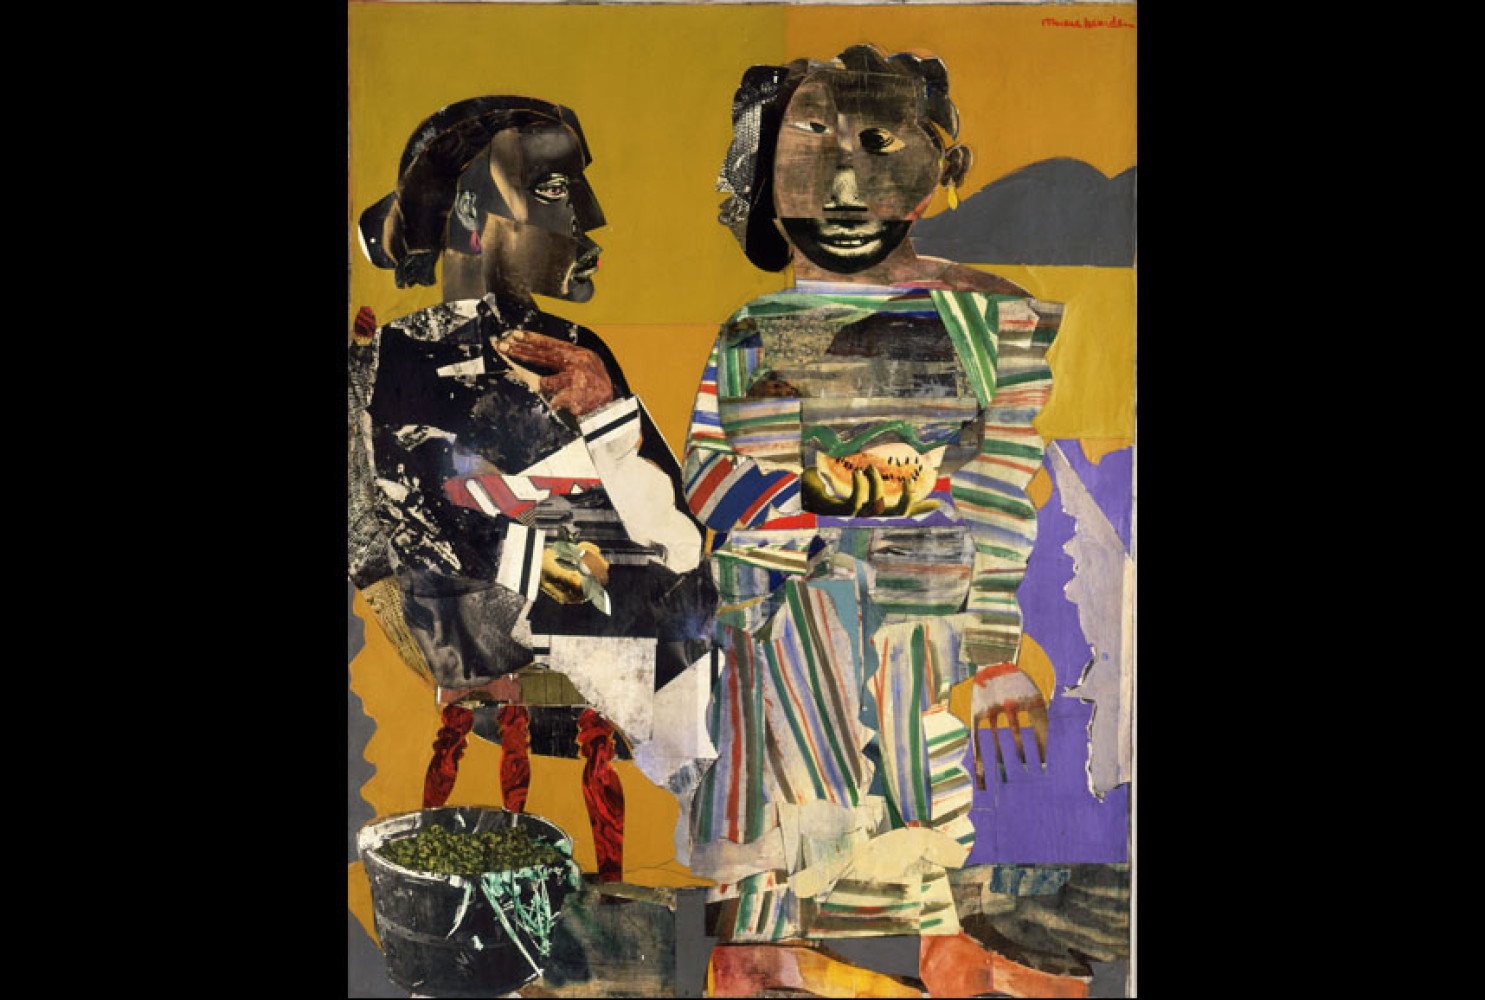 Romare Bearden
Melon Season, 1967
Mixed media on canvas
56 1/2 x 44 1/2 inches
Collection Neuberger Museum of Art, Purchase College, SUNY, Gift of Roy R. Neuberger, 1976.26.45
copyright VAGA at Artists Rights Society (ARS), NY
Courtesy American Federation of Arts
